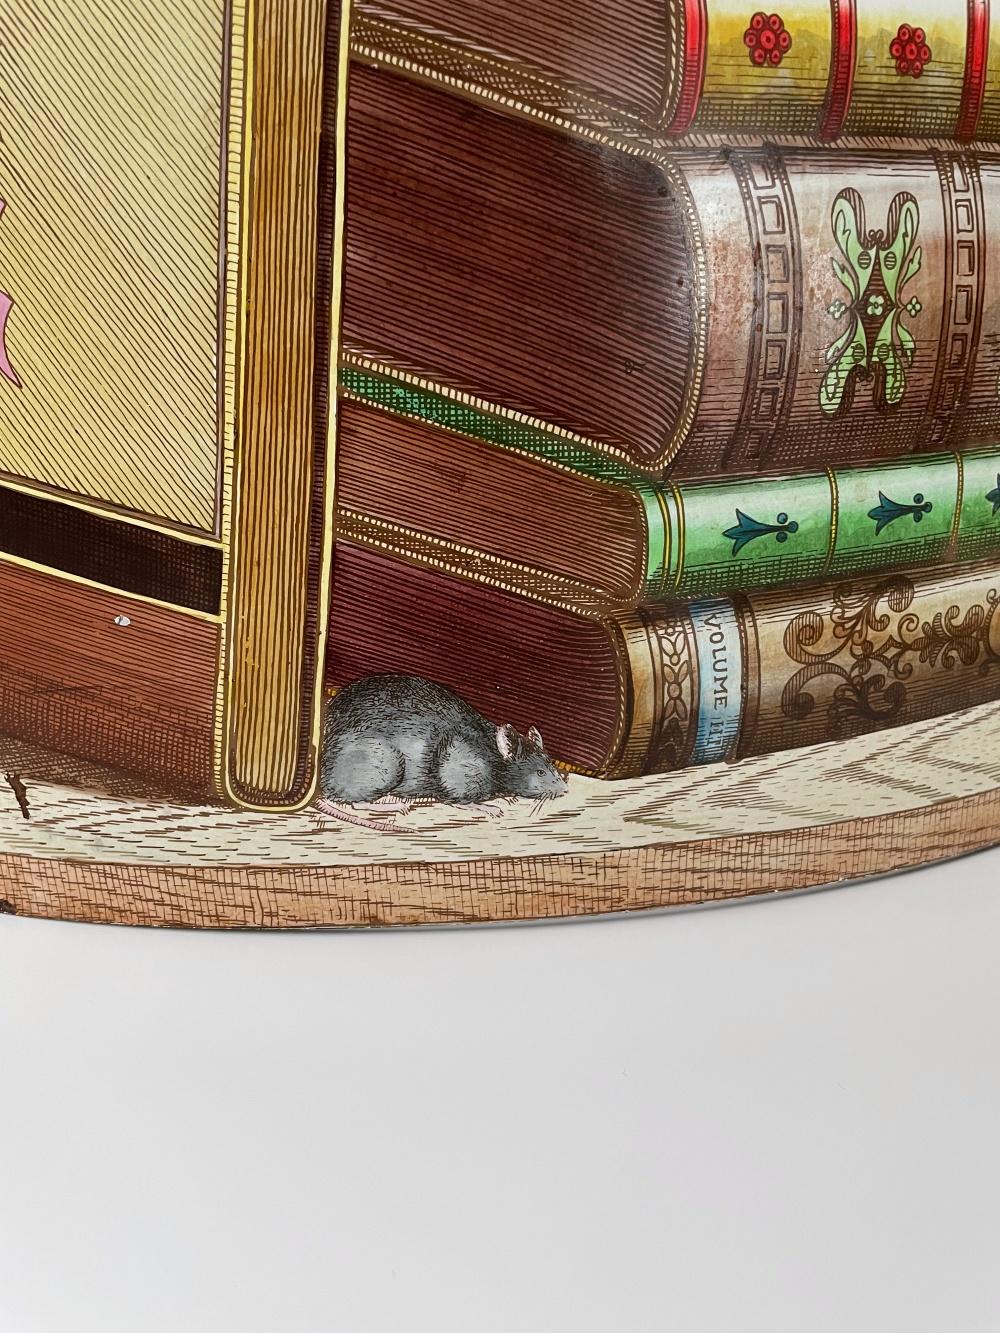 Enamel Fornasetti 'Siamese Cat on Books' Umbrella Stand, Signed & Dated, 1997, Italy